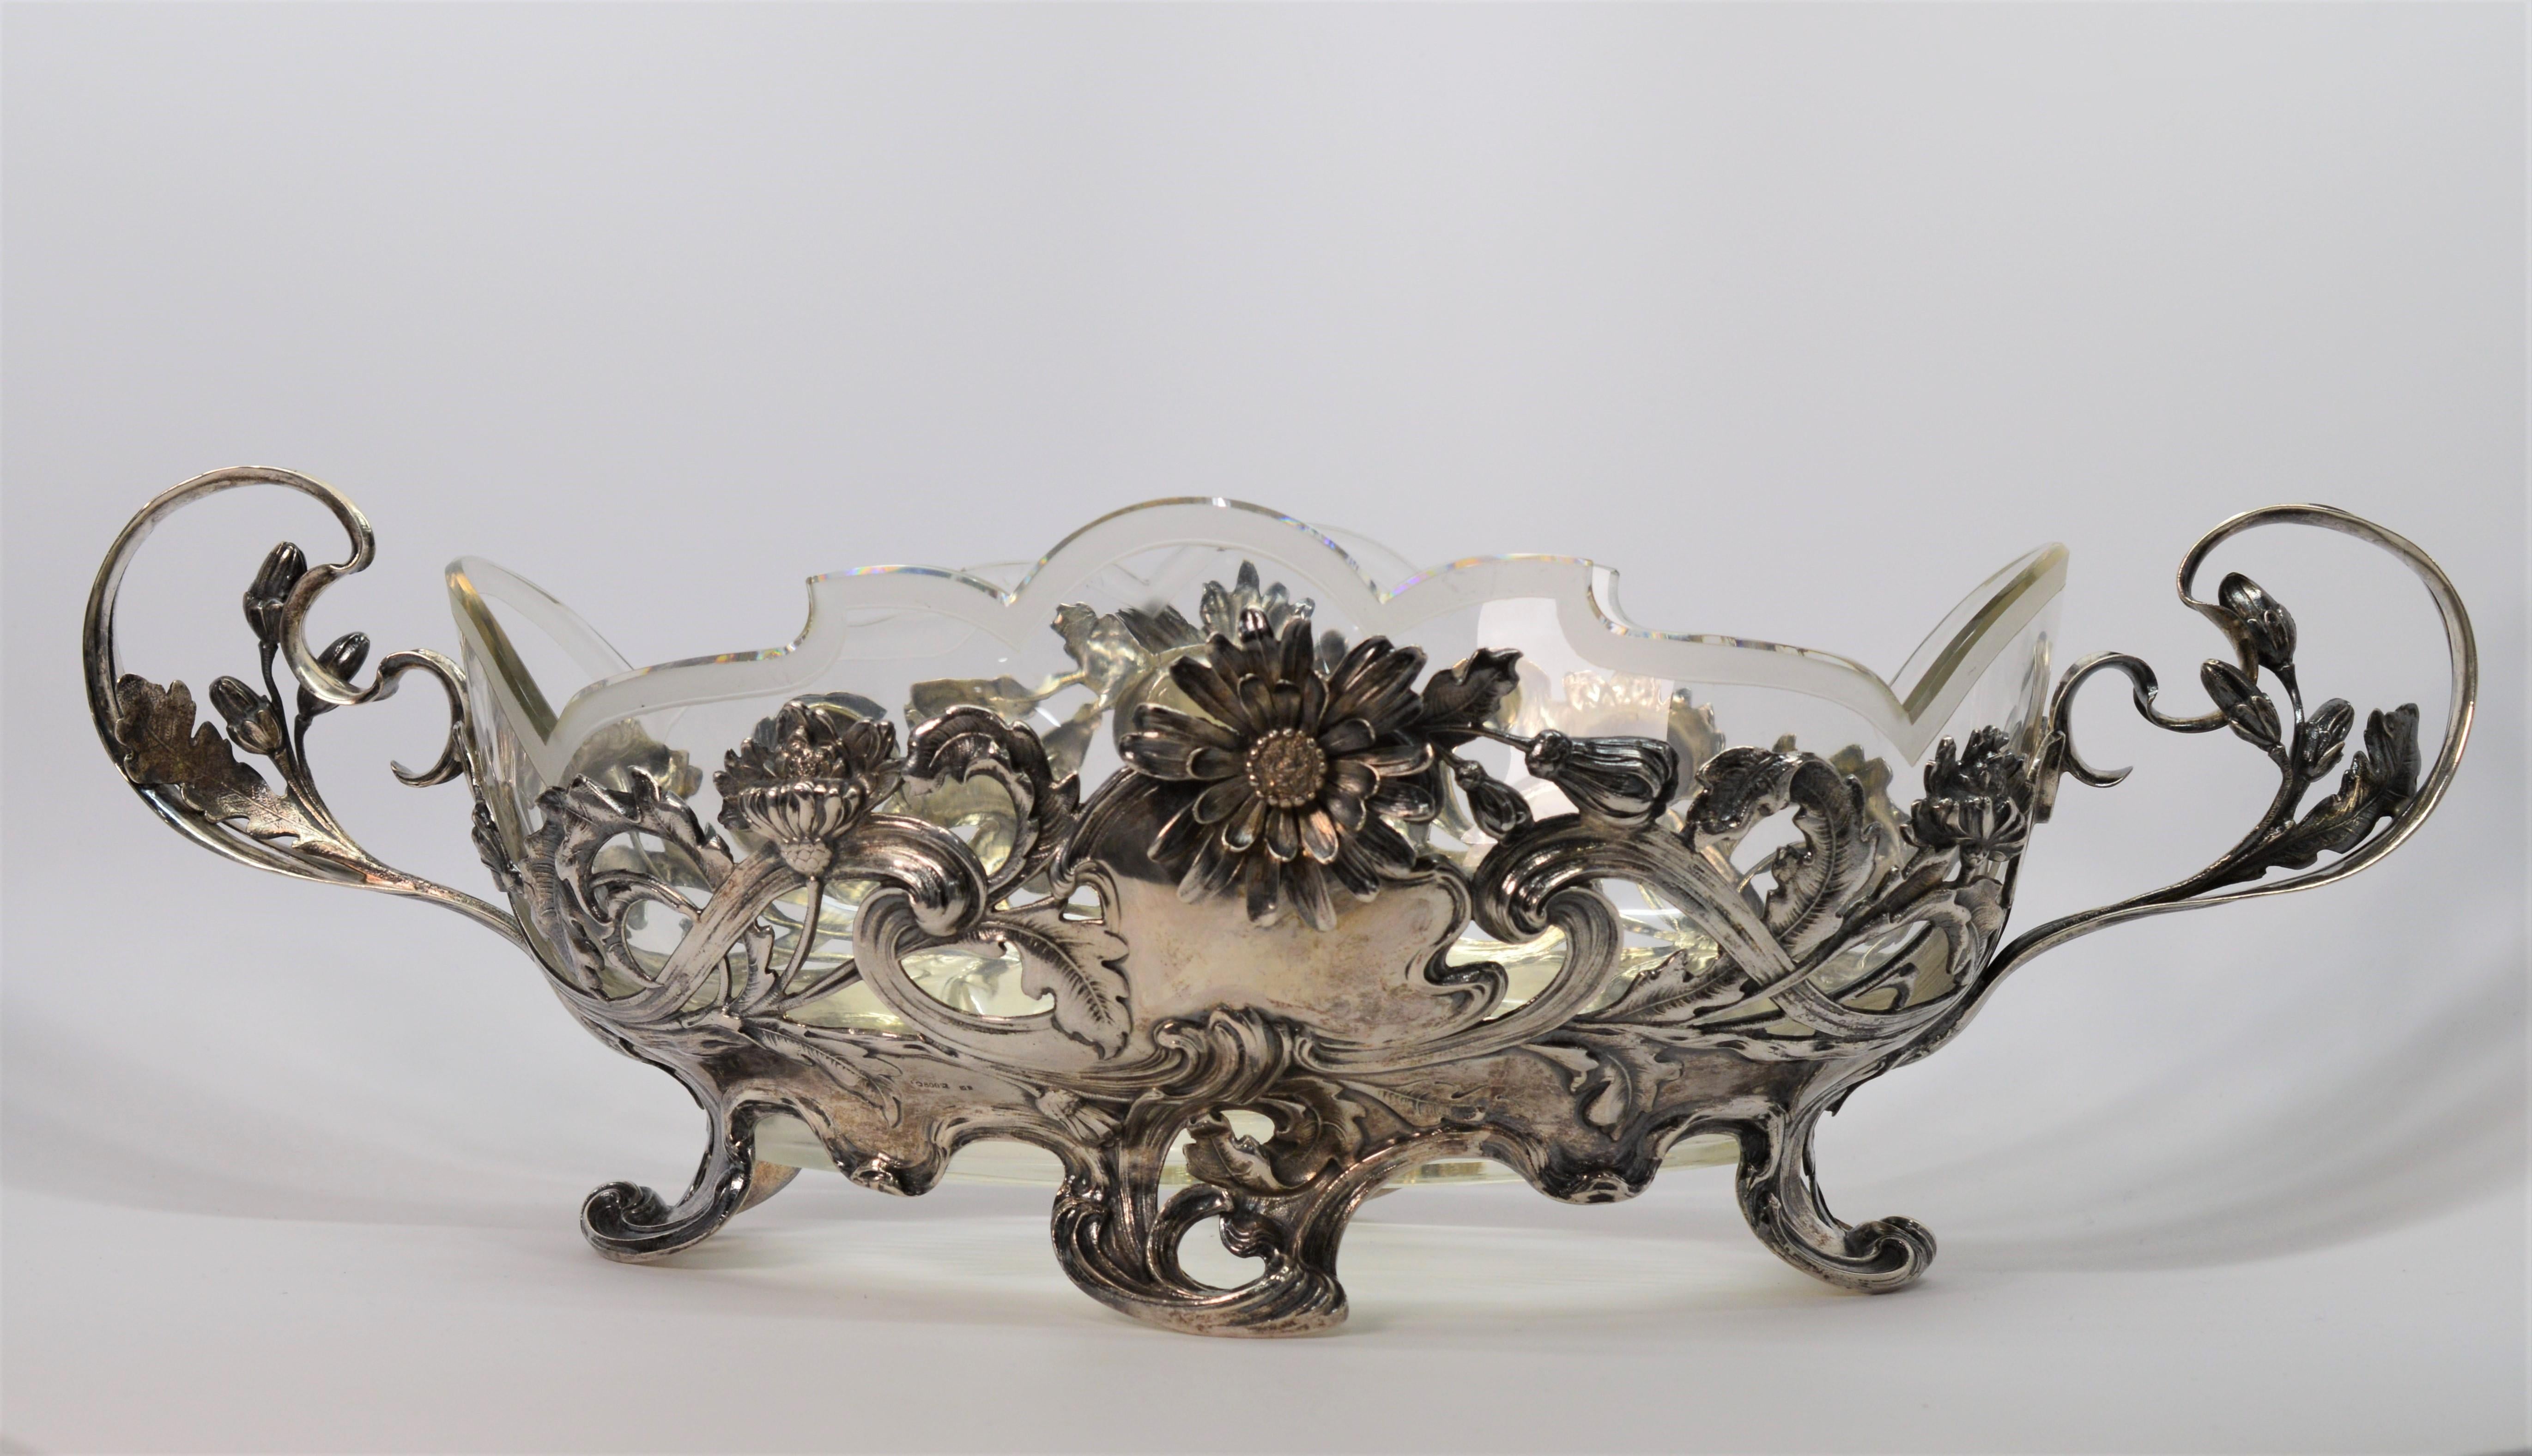 In excellent condition, this exquisite bowl is a work of art with it's intricate floral vine patterned design done is .800 German Silver. 
Intact is a frosted leaded glass insert that allows for versatility of use. Measures 18L x 7-1/2W  x 6H. Known